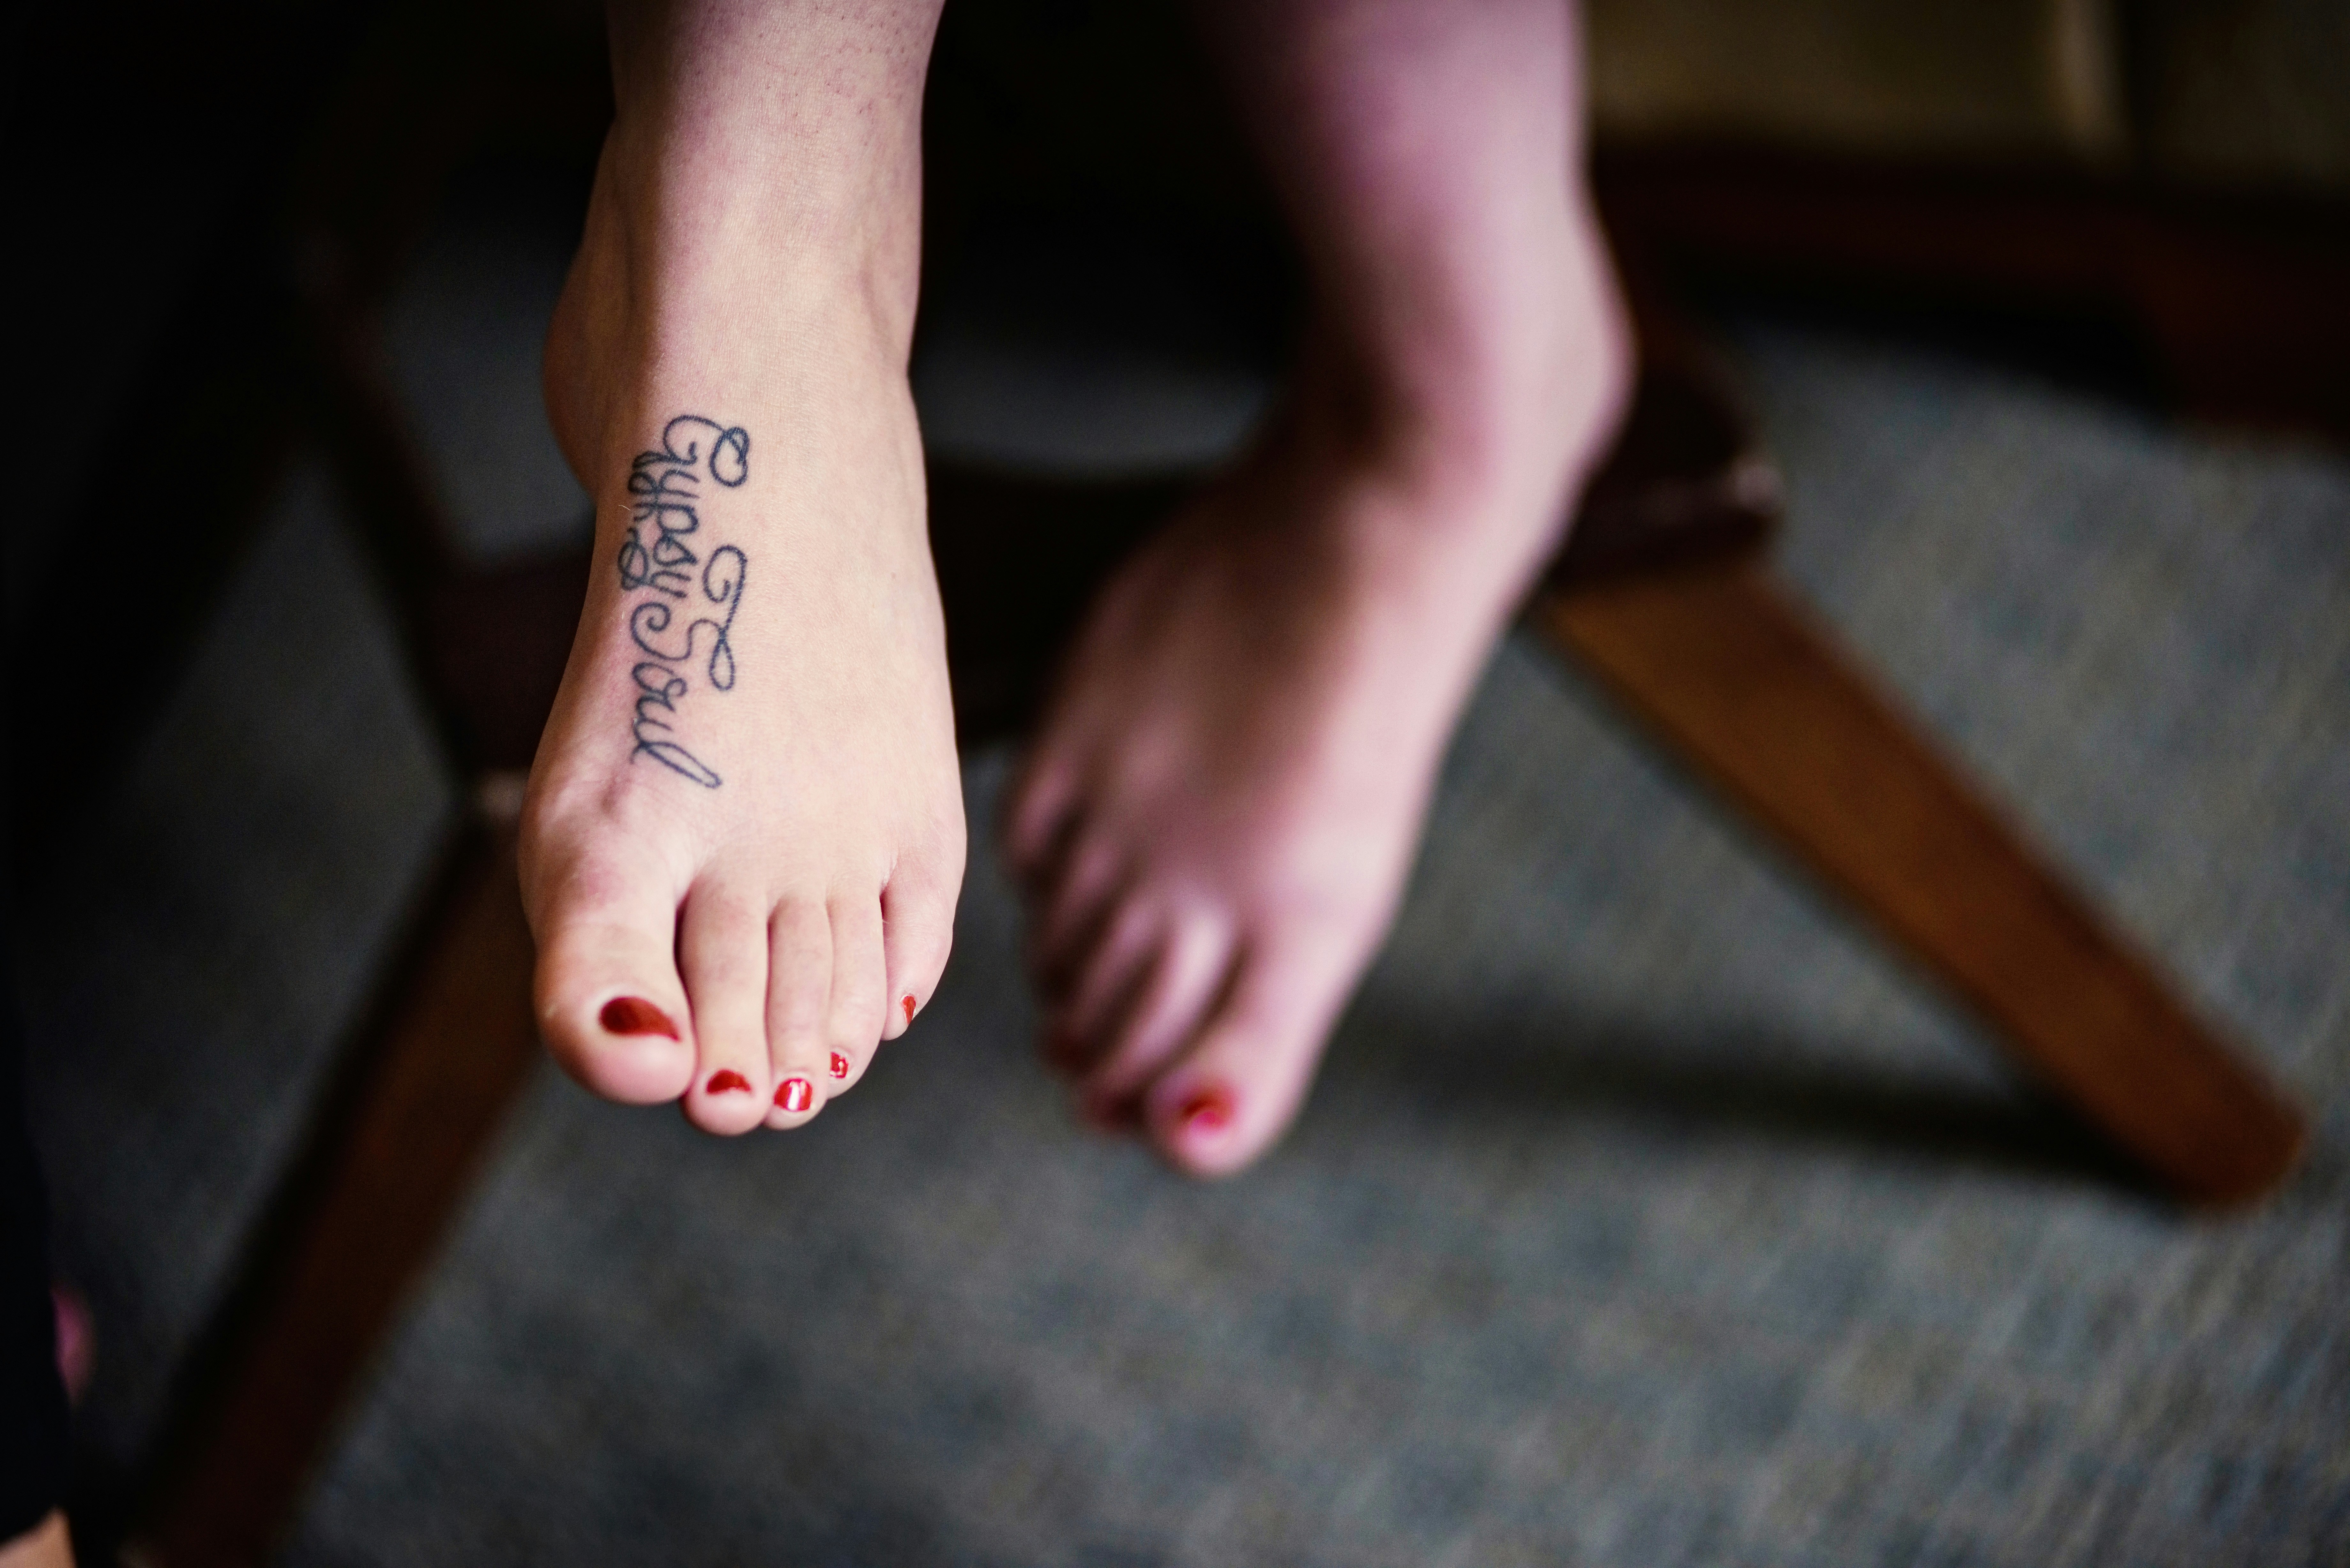 Gypsy Soul tattoo on bare feet with red-painted toenails.